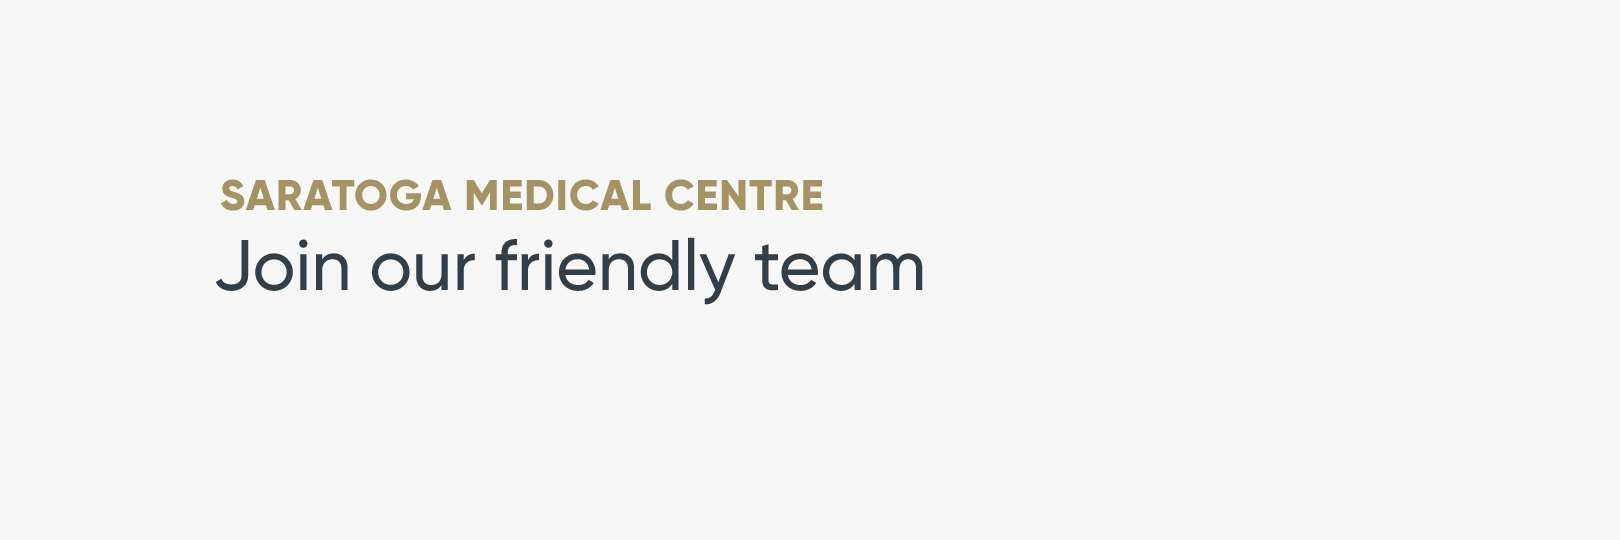 Join our Saratoga Medical Centre Team